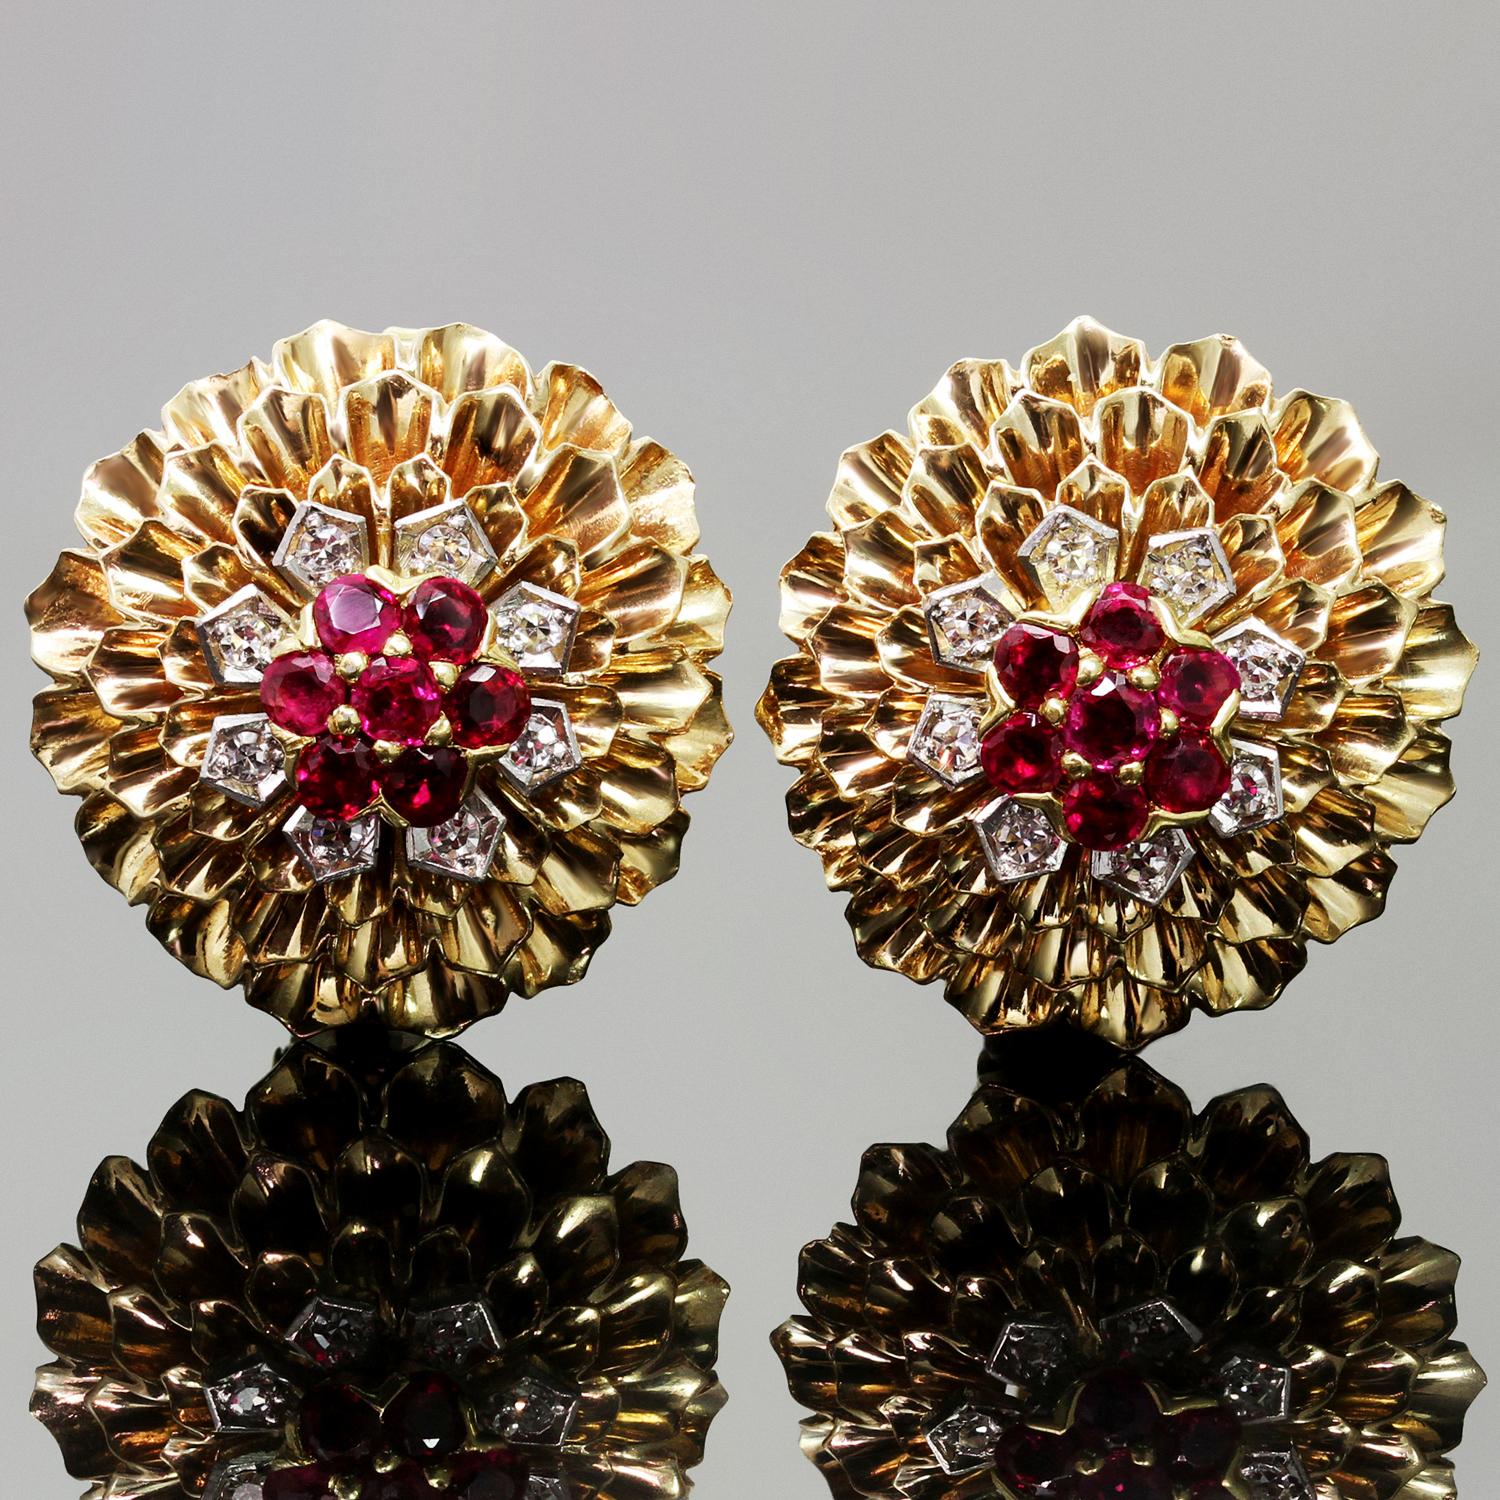 These fabulous circa 1960s Cartier 14k yellow gold clip-on earrings feature a vibrant cluster design set with sparkling red rubies of an estimated 1.00 carats and round diamonds of an estimated 0.30 carats. One earring is marked Cartier 14KT 18134.